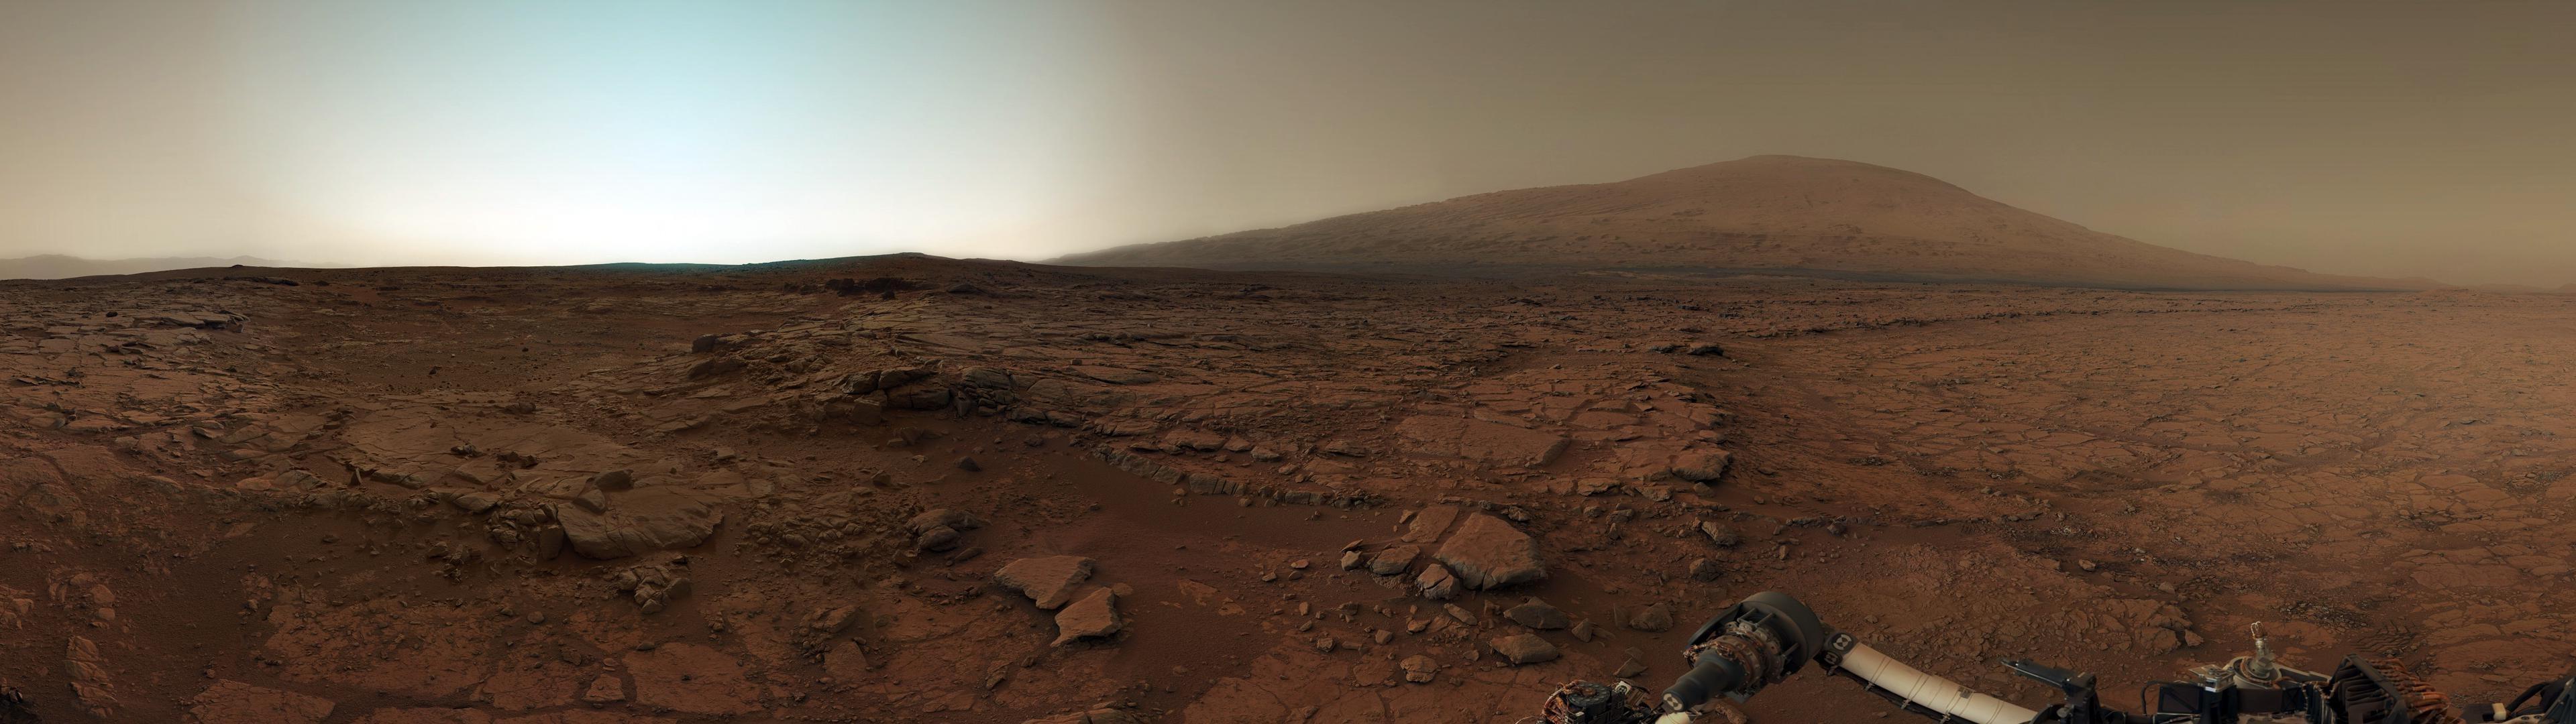 landscape mars space curiosity wallpaper and background